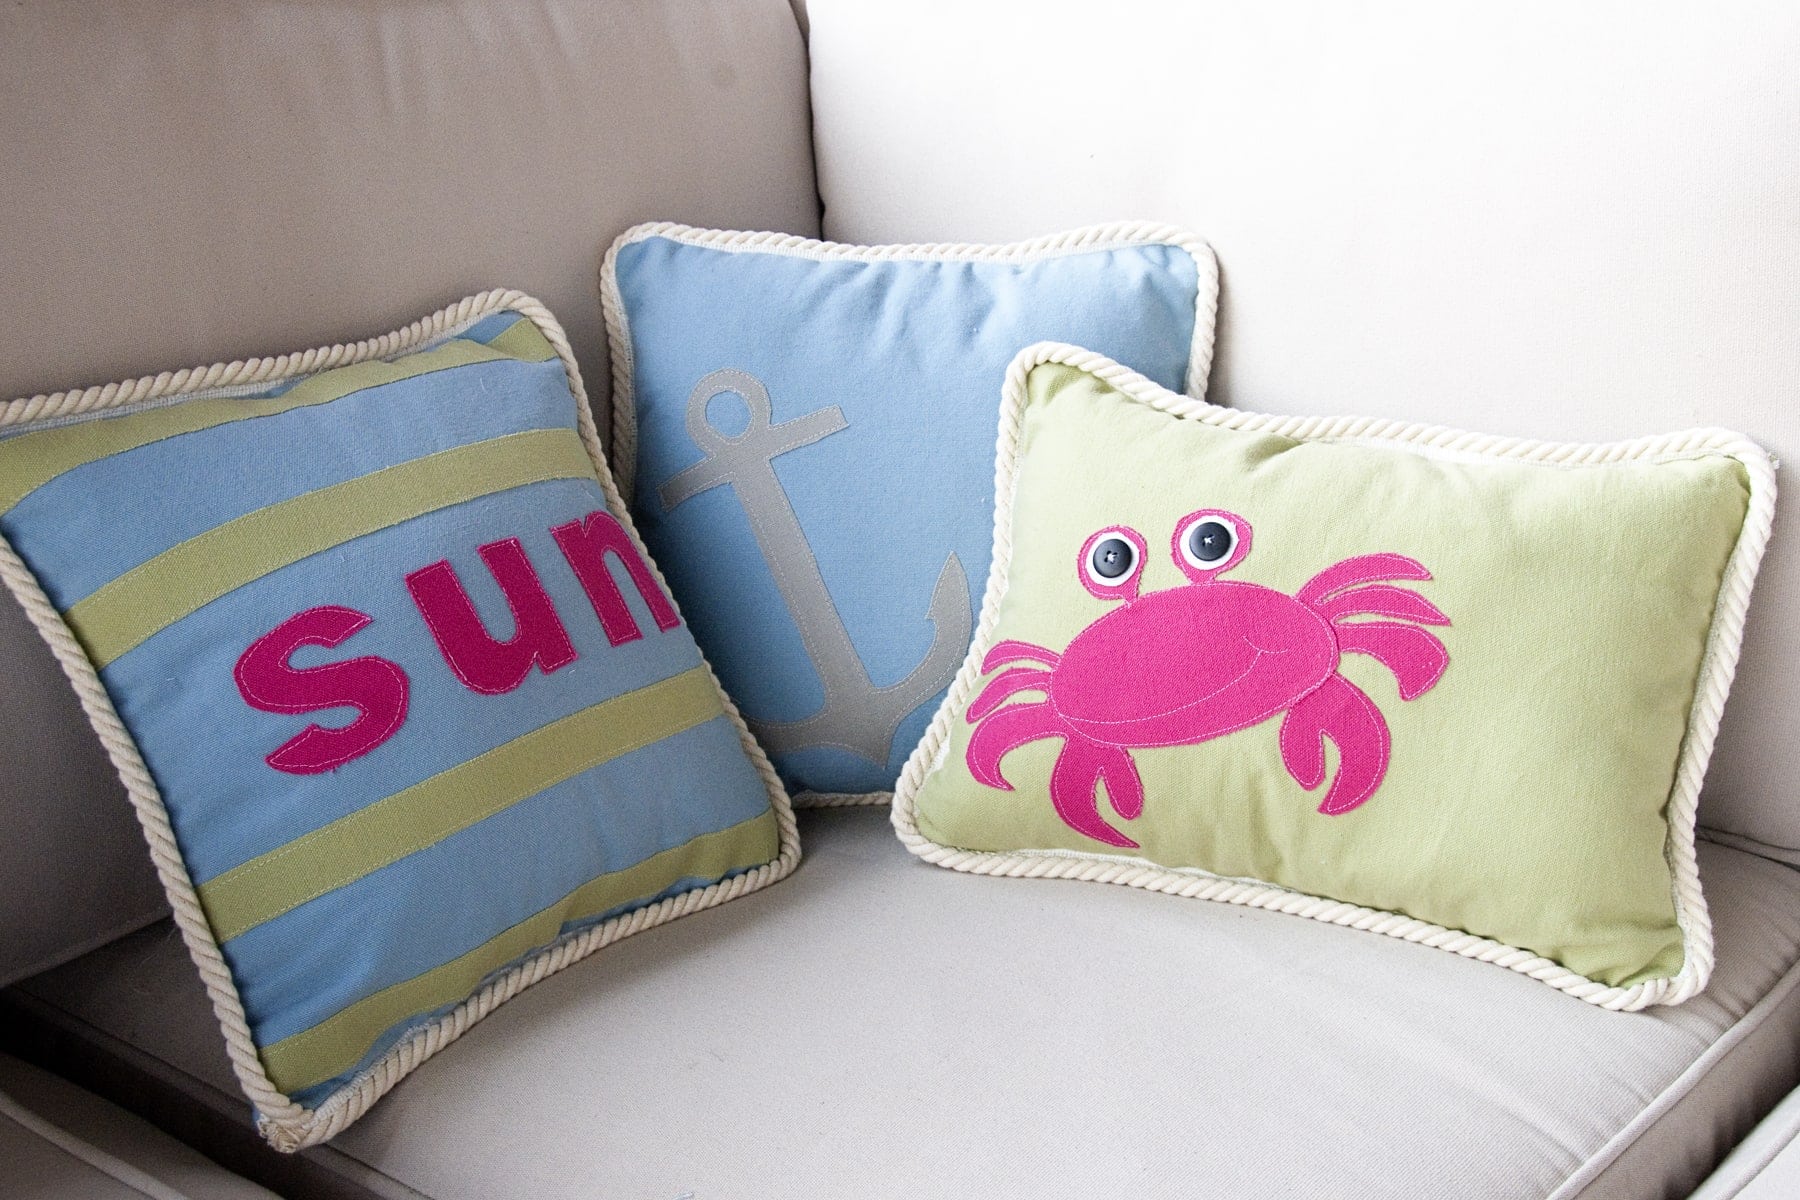 Summer Pillows- with free pattern :)